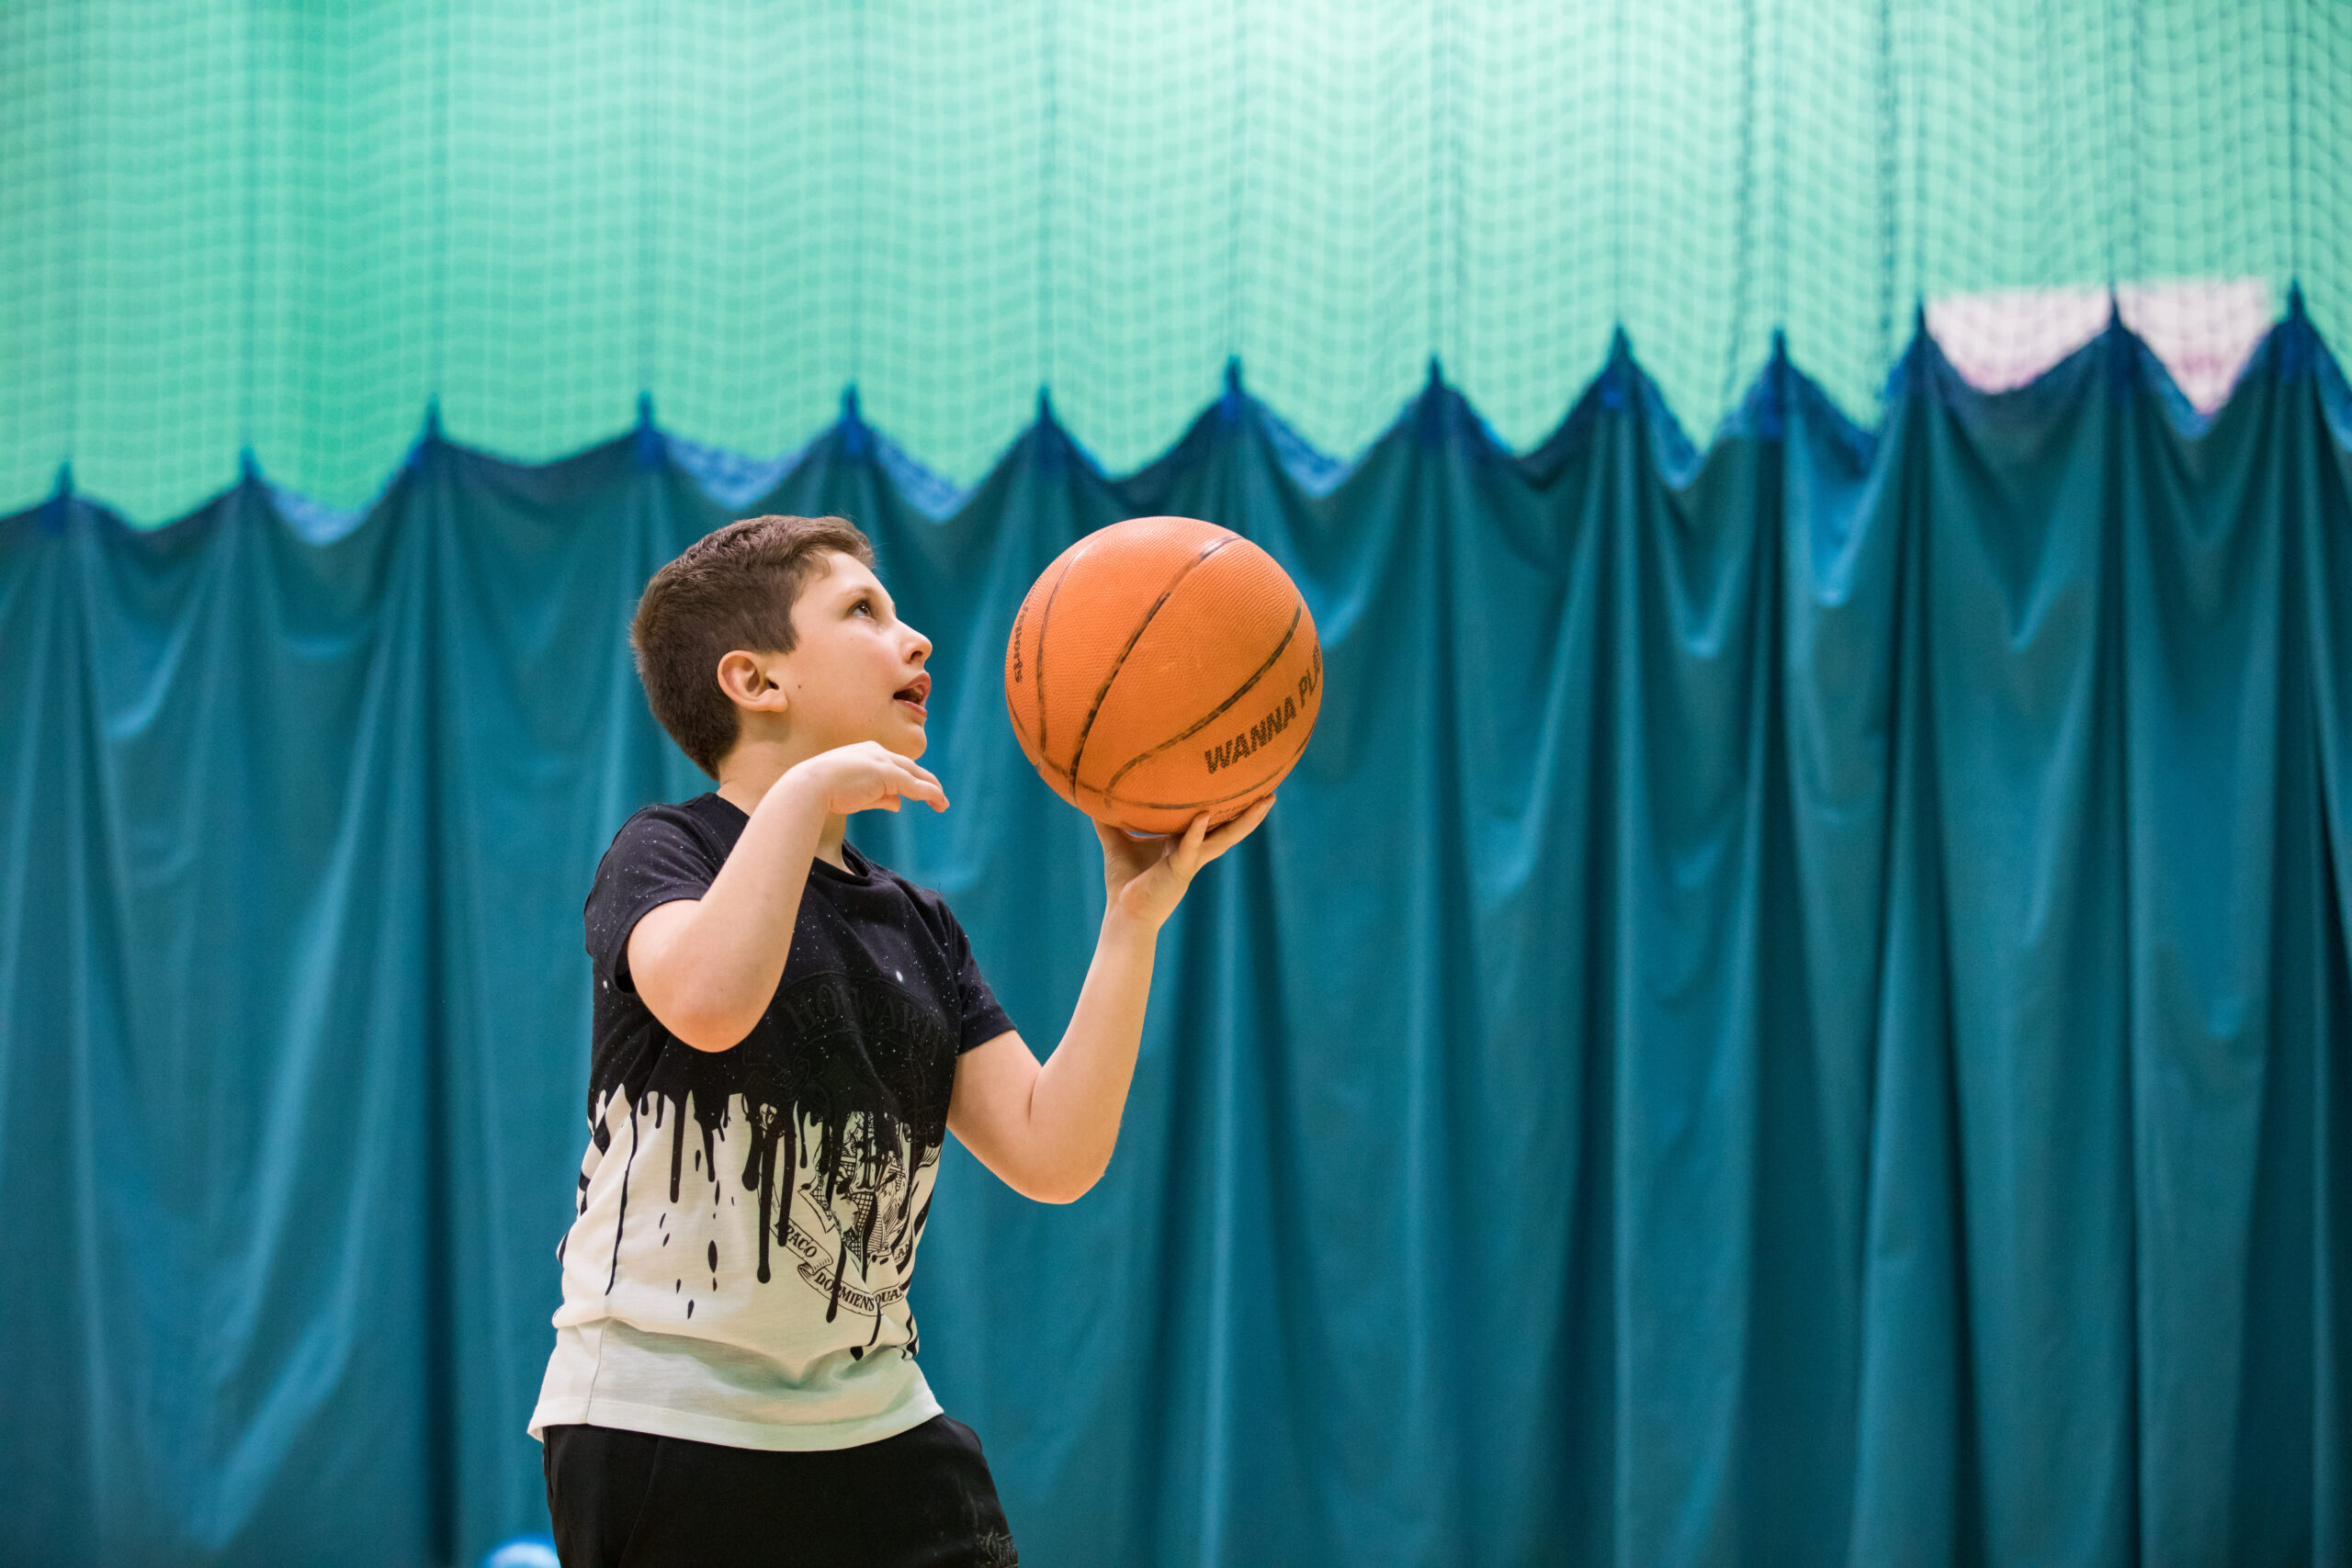 A young boy wearing a black and white shirt prepares to take a basketball shot in an indoor court, concentrating intently. A green curtain hangs in the background.